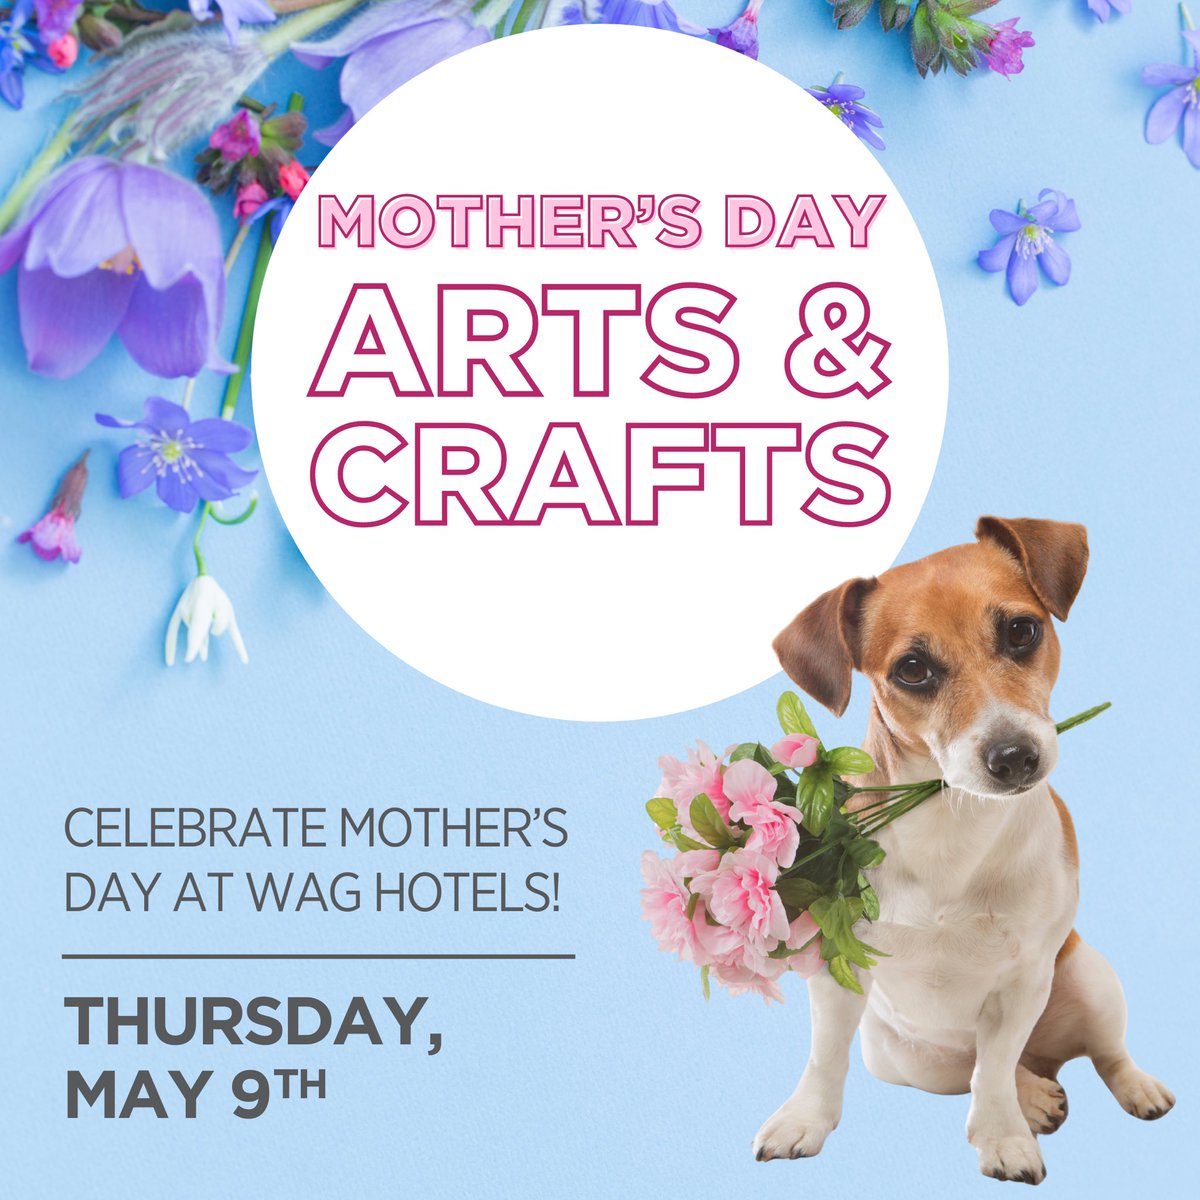 Let your pup unleash their inner Picasso & celebrate Mother’s Day @waghotels! 🐶🎨

Drop by for daycare this Thursday, May 9th for a pawsome arts & crafts event where your fur baby will create a personalized Mother’s Day card to take home. 🥰

#WagHotels #onlyatWagHotels #petcare